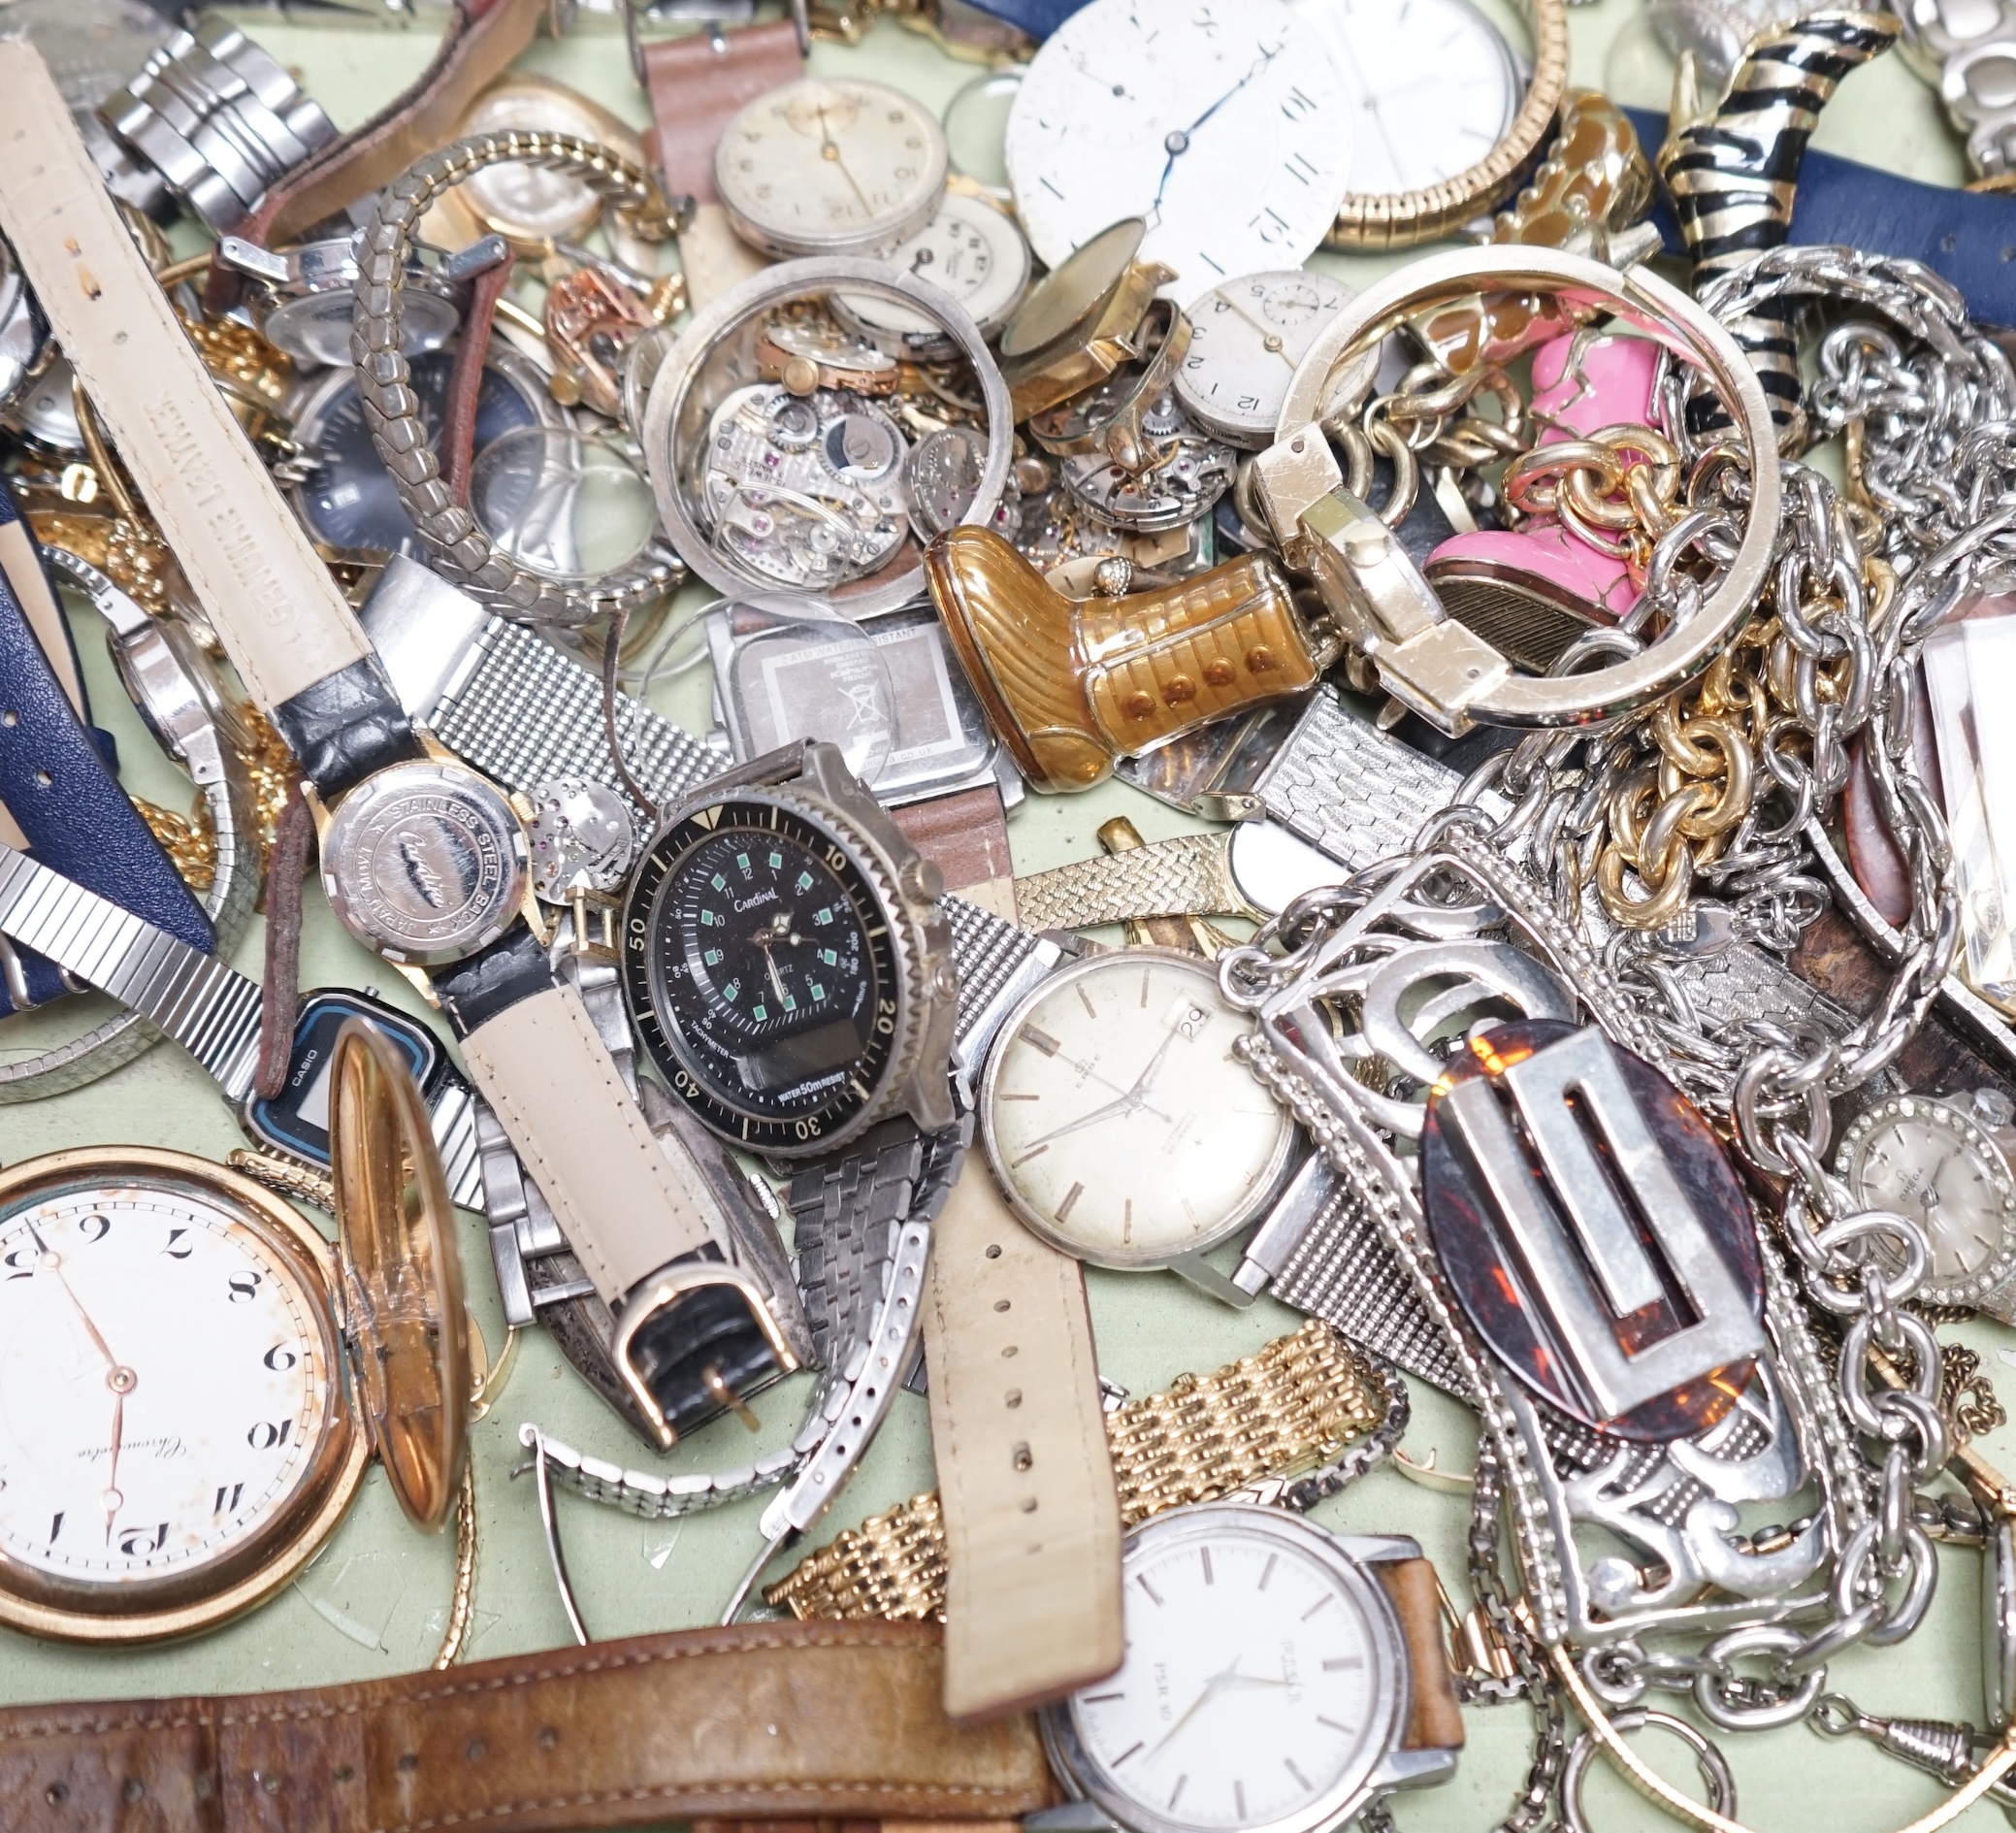 A small collection of assorted lady's and gentleman's wrist watches including Seiko, Erbe and Timex, a pocket watch and assorted costume jewellery including Givenchy. Condition - poor